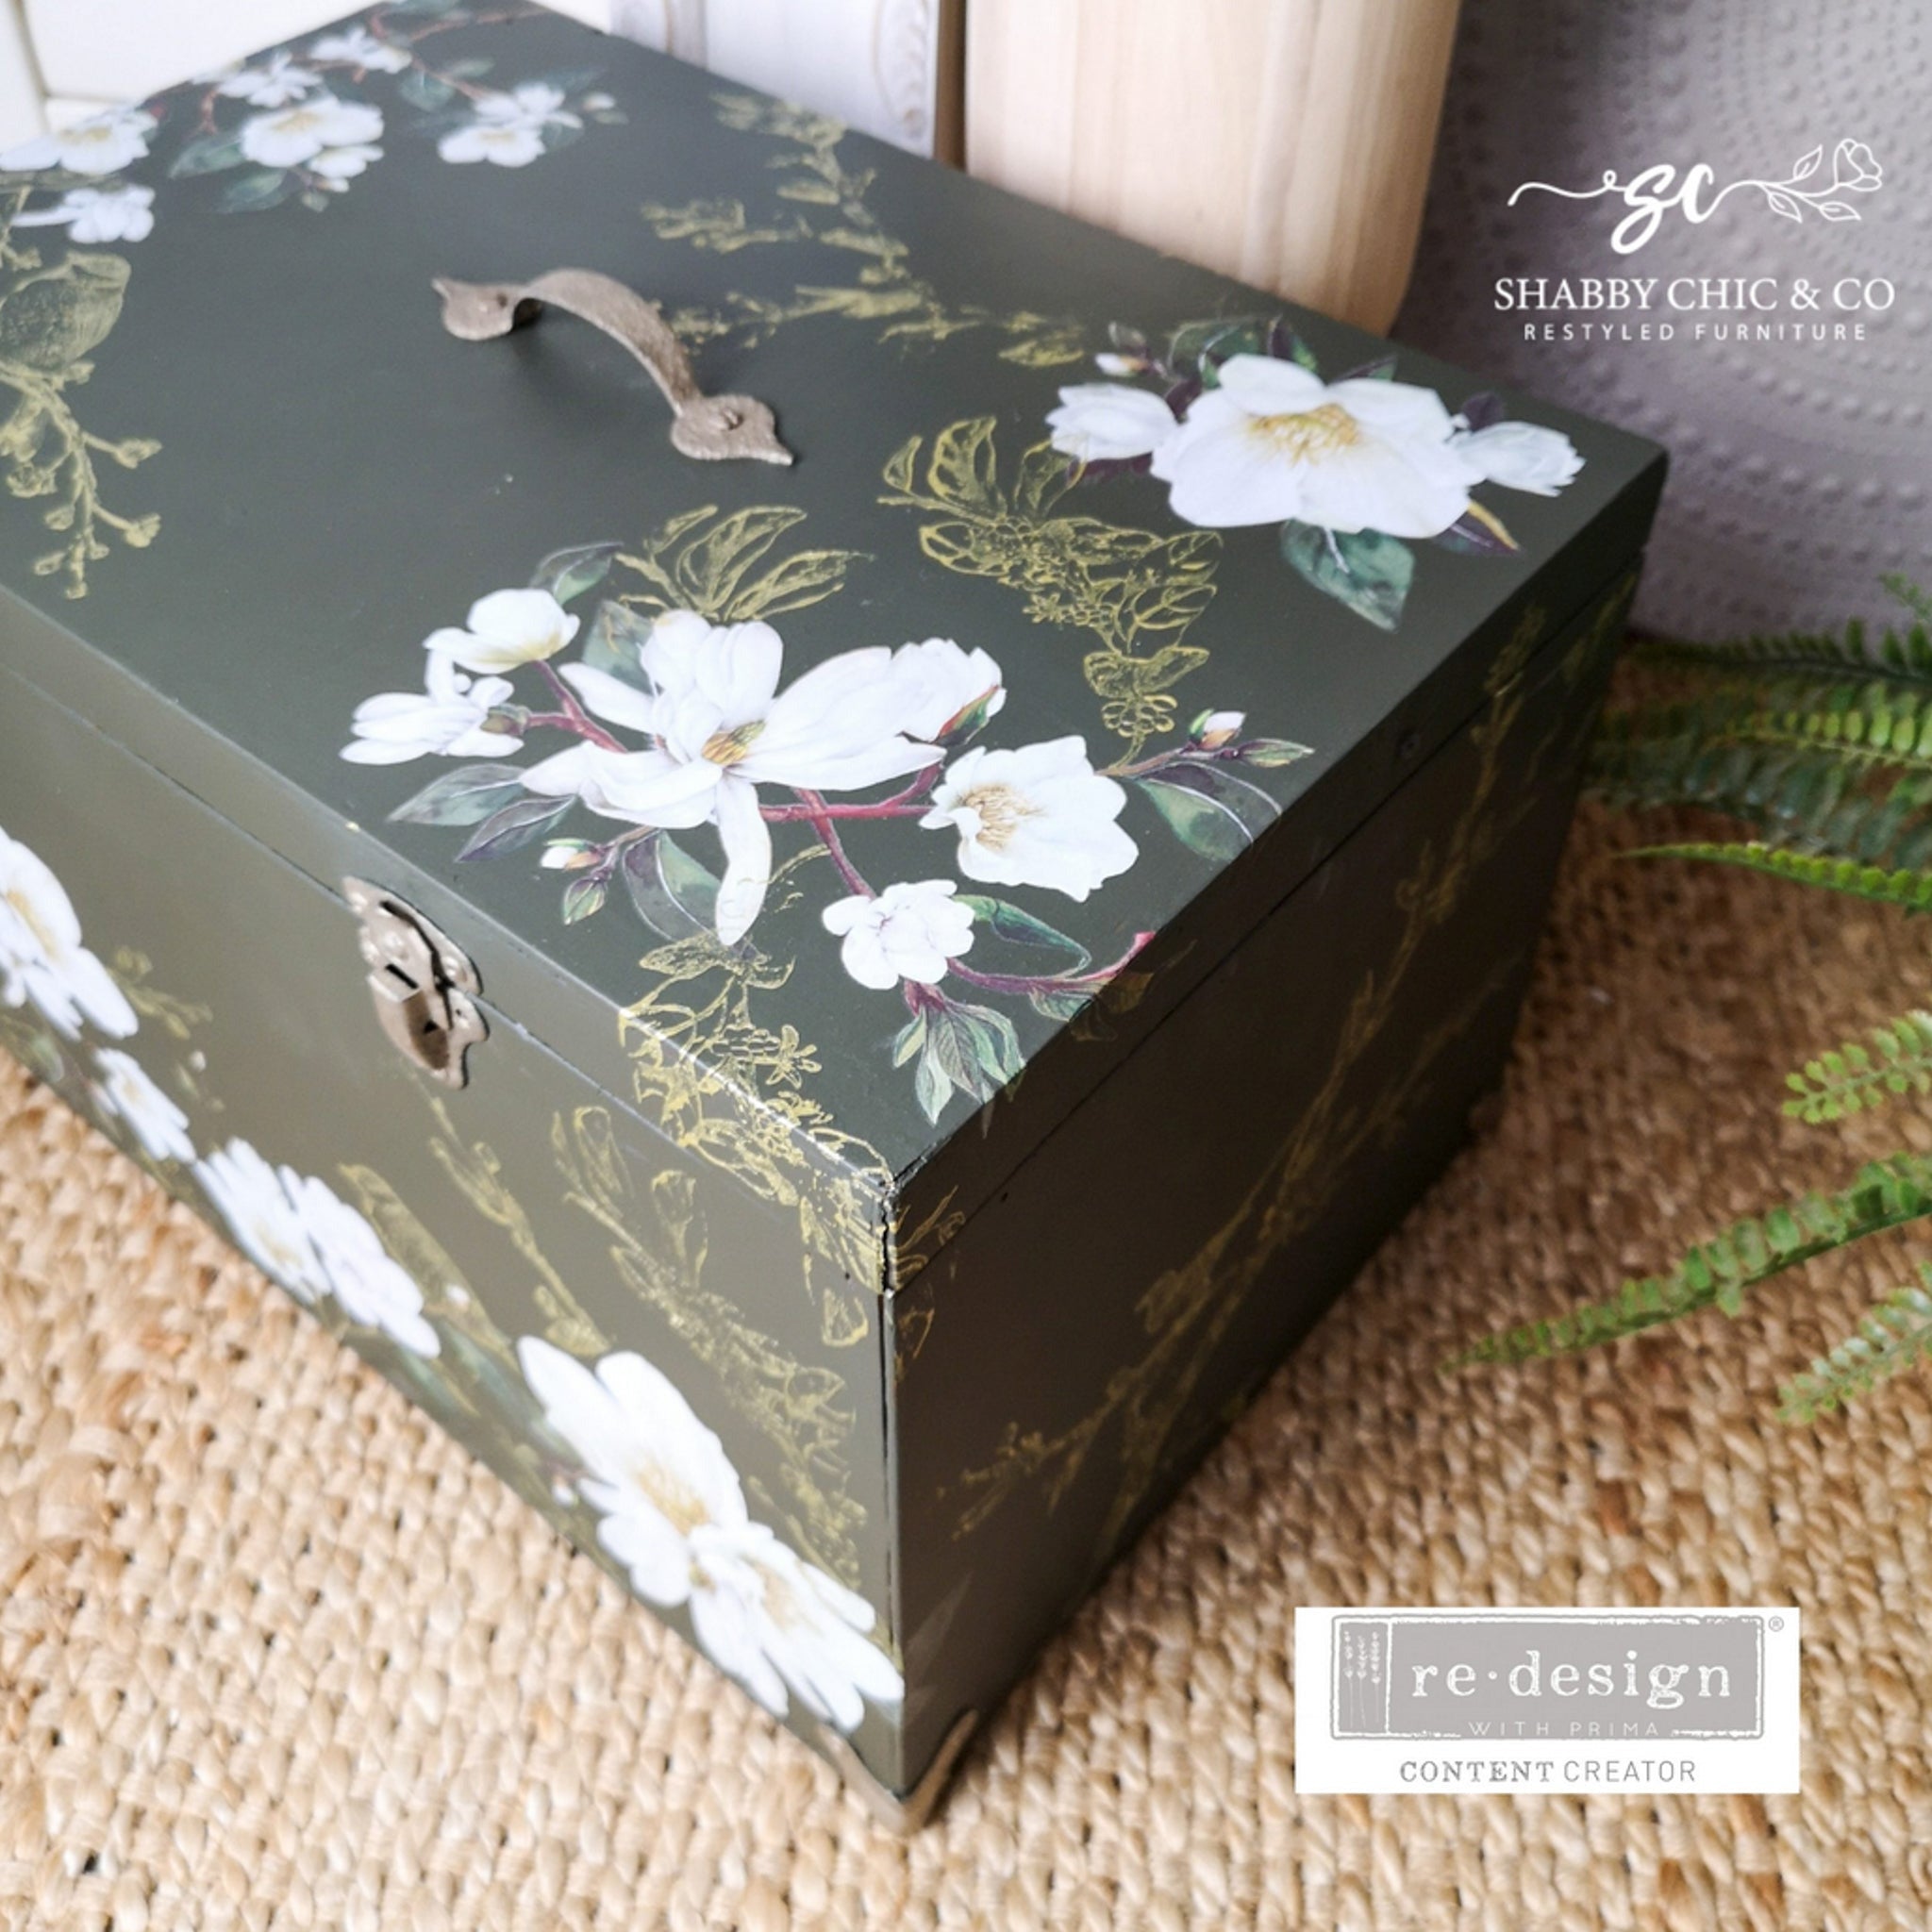 An arial corner view of a vintage footlocker storage chest refurbished by Shabby Chic & Co. Restyled Furniture is painted hunter green and features ReDesign with Prima's White Magnolia small transfer on it.